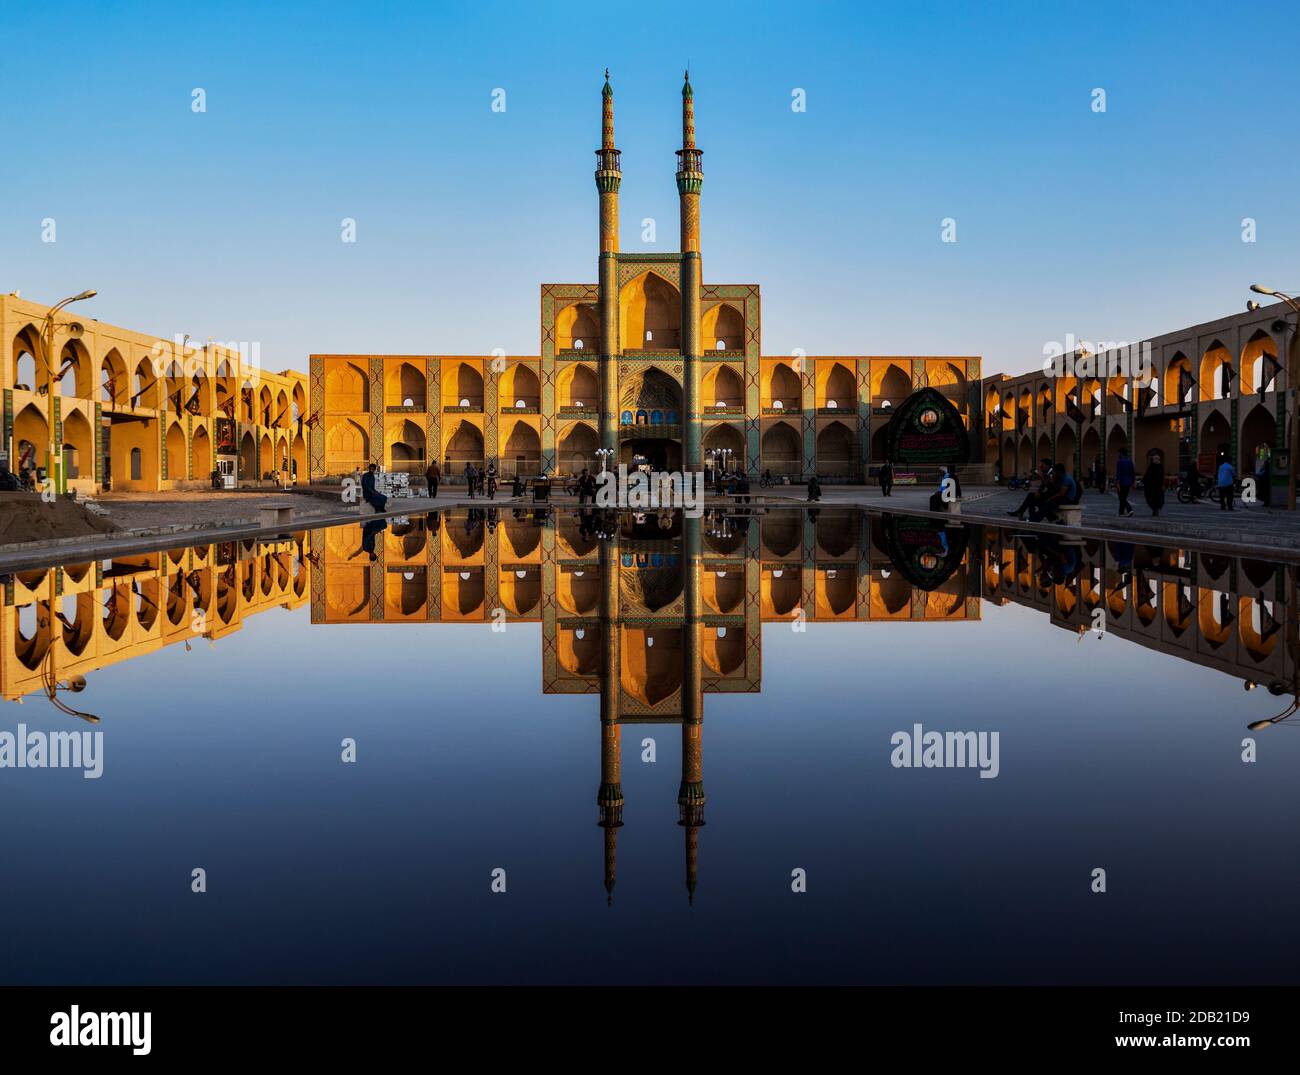 The Amir Chakhmaq Complex is an imposing facade with many alcoves and two tall towers, which in older times was the entrance to a large bazaar. Stock Photo